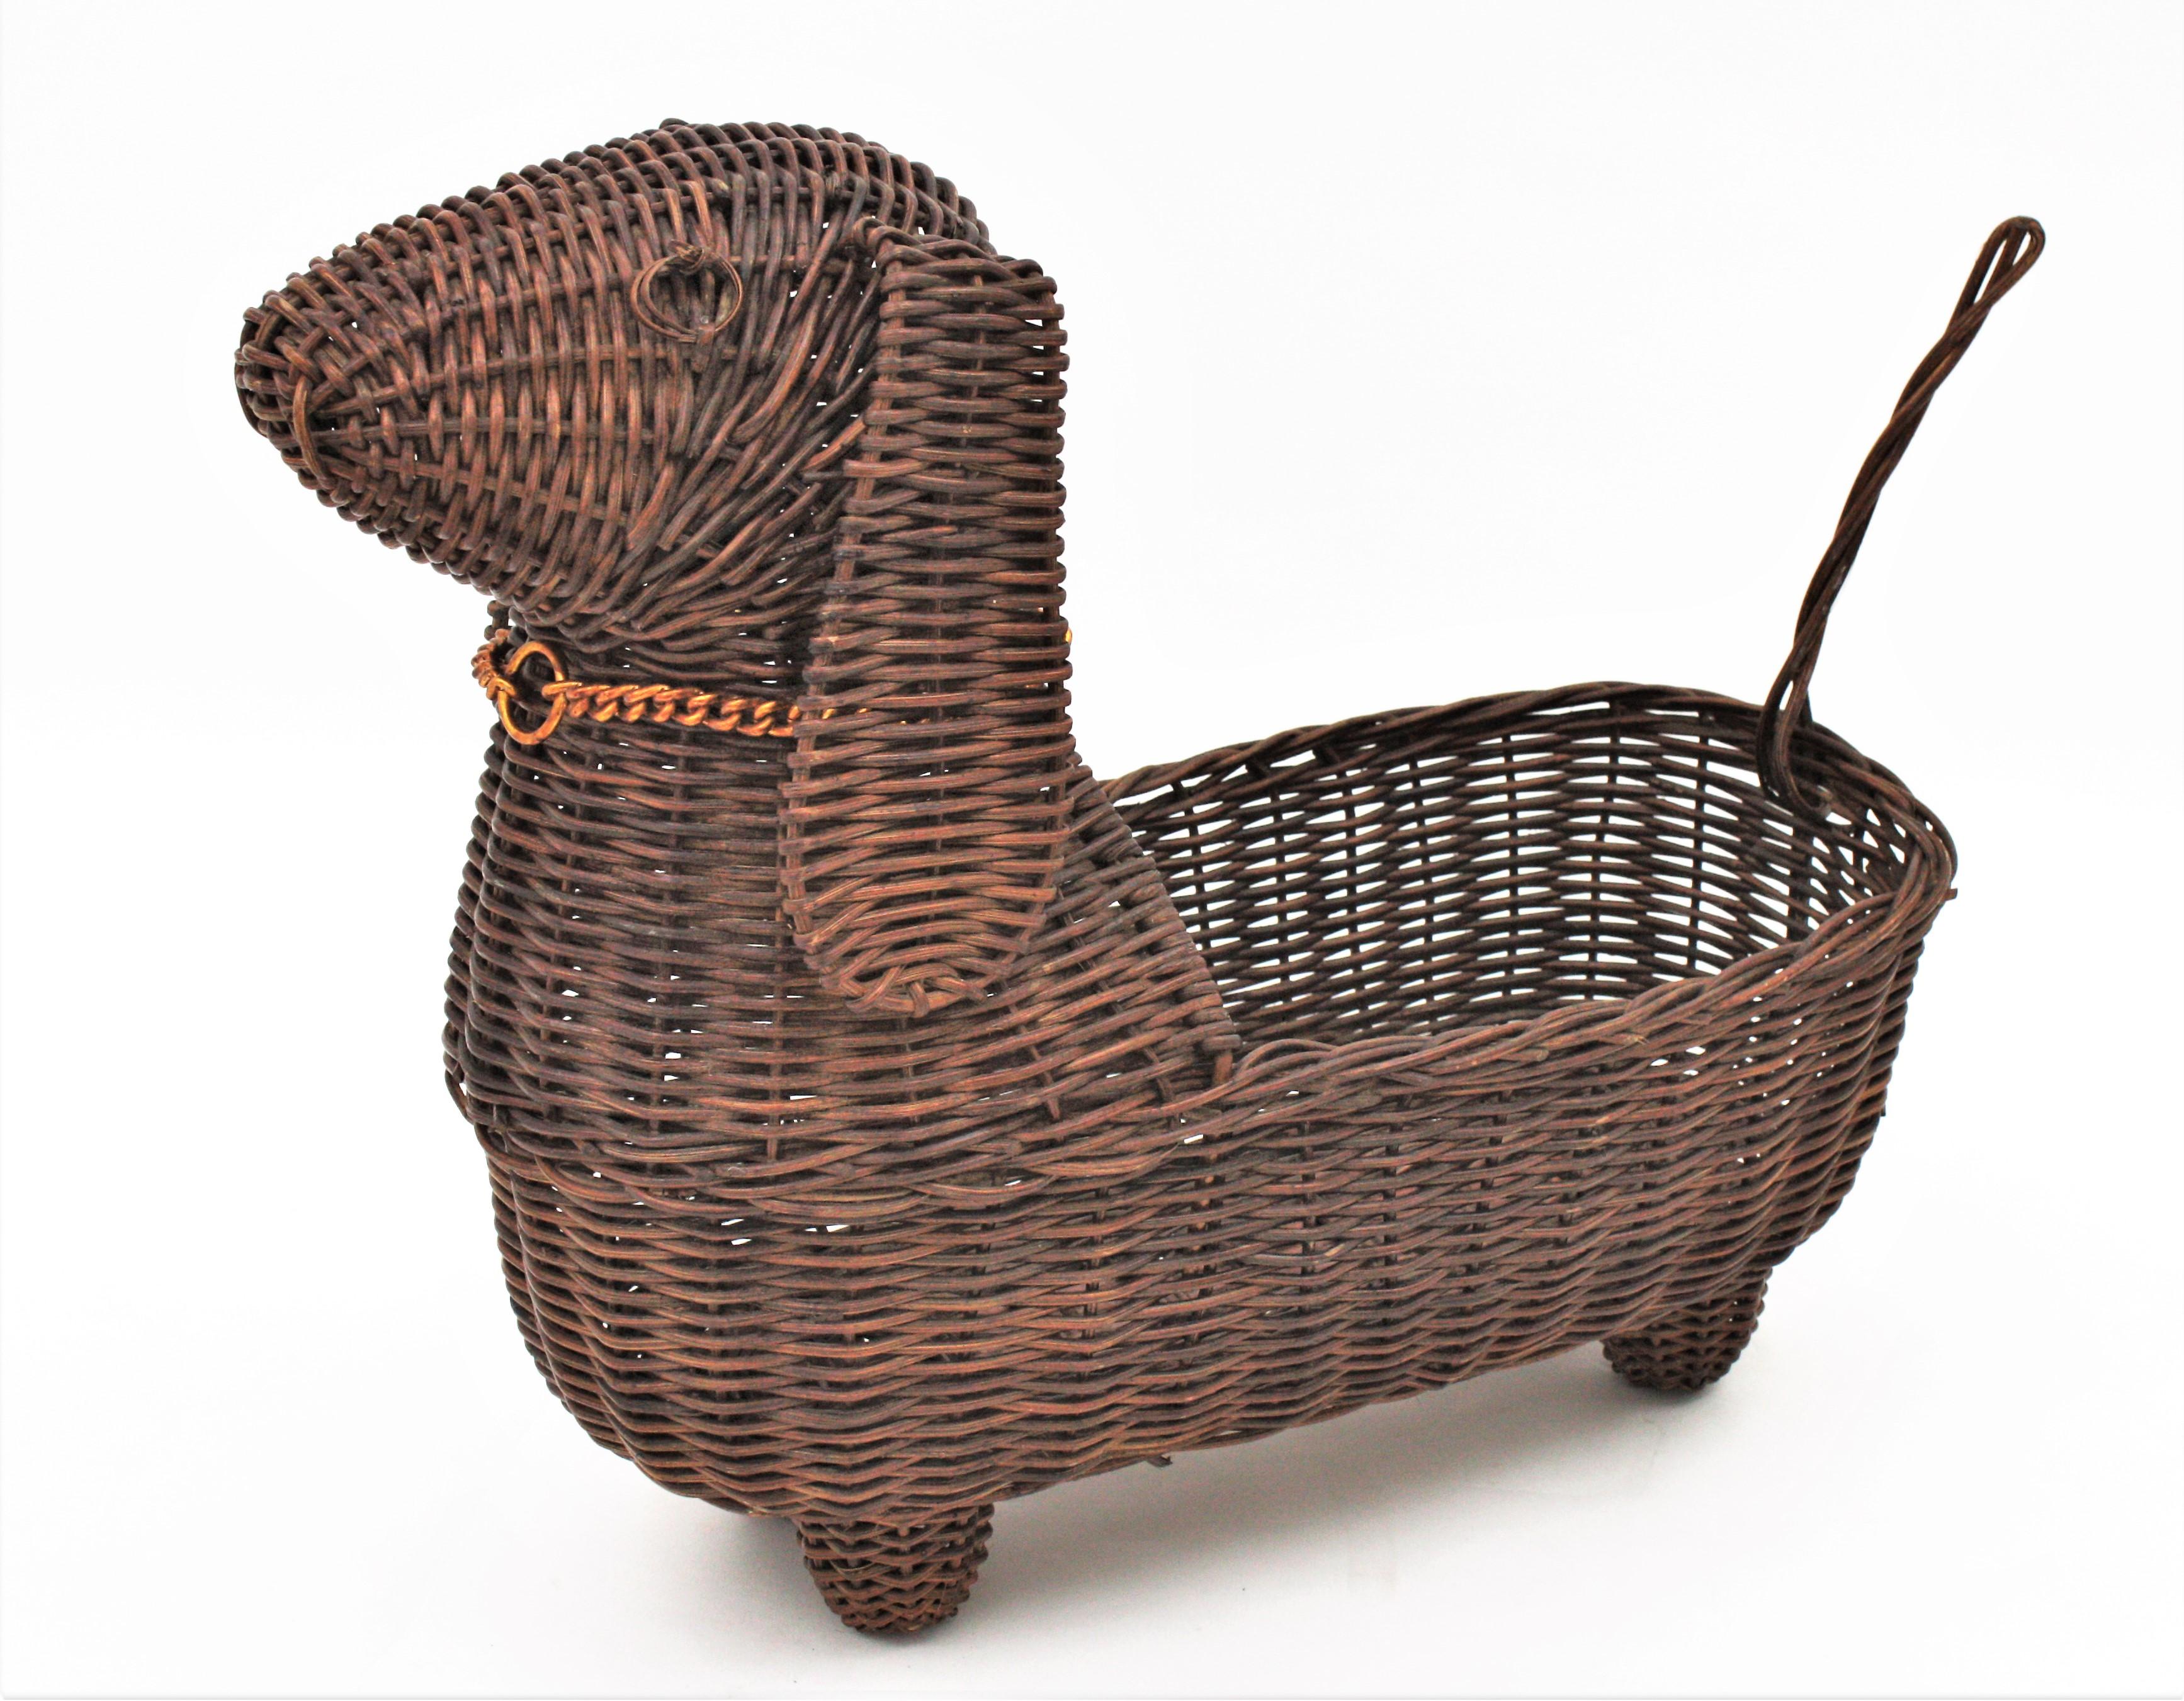 Lovely woven rattan decorative basket in the shape of a dog, France, 1960s.
This unusual handcrafted basket has a very realistic dog design accented by a gilt metal chain dog collar.
Add a custom made cuddling cushion for your domestic pets.
This